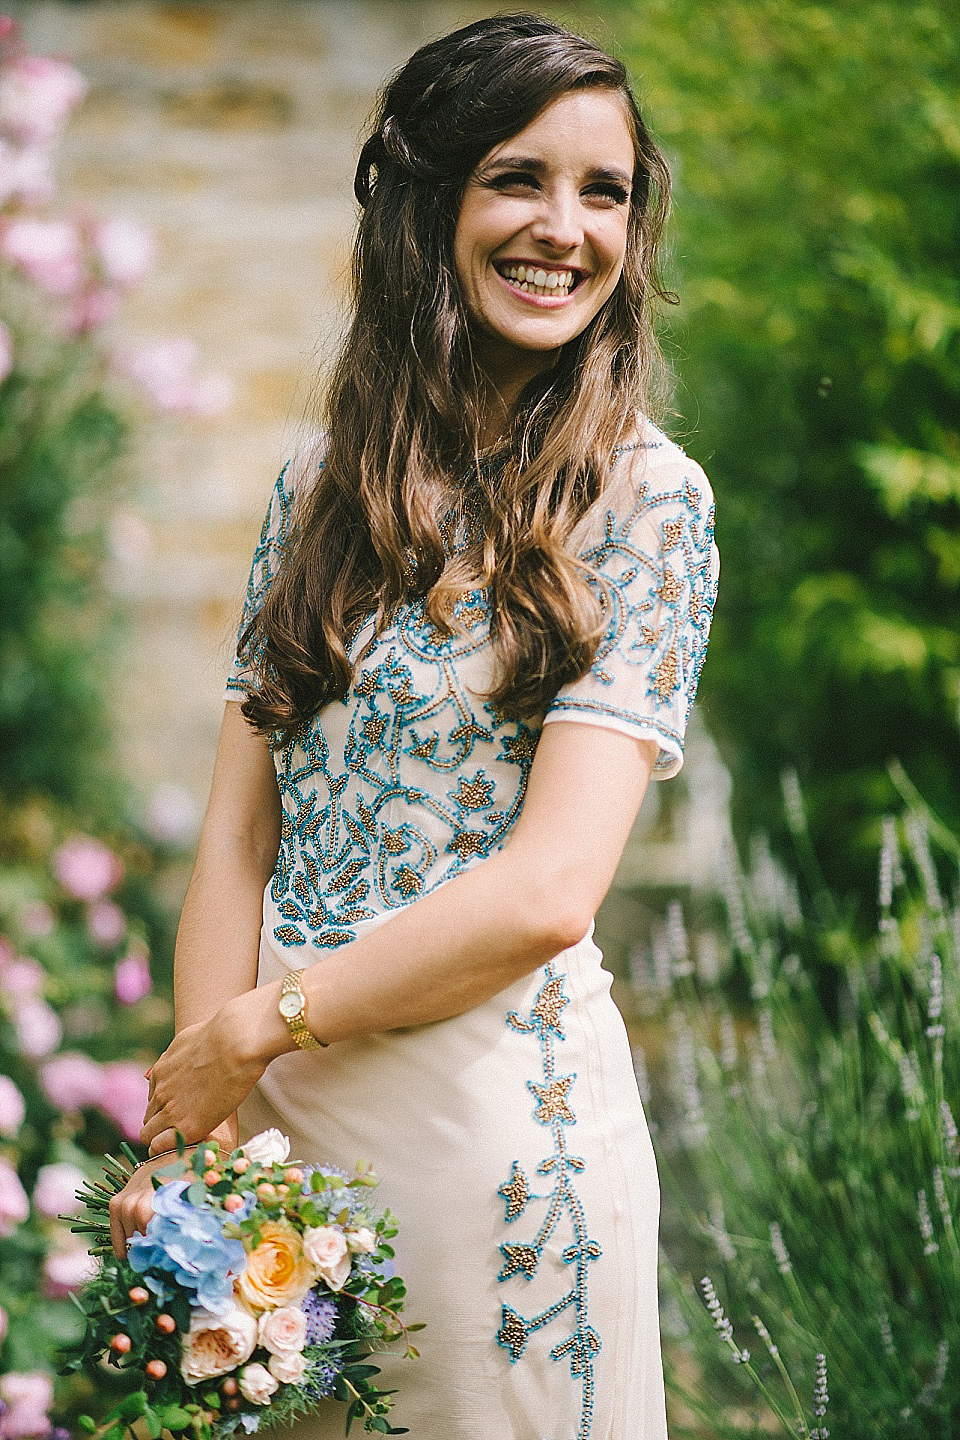 Eliza Jane Howell for an Effortless Glamour Style Wedding at Brinkburn Priory. Photography by Paul Santos.